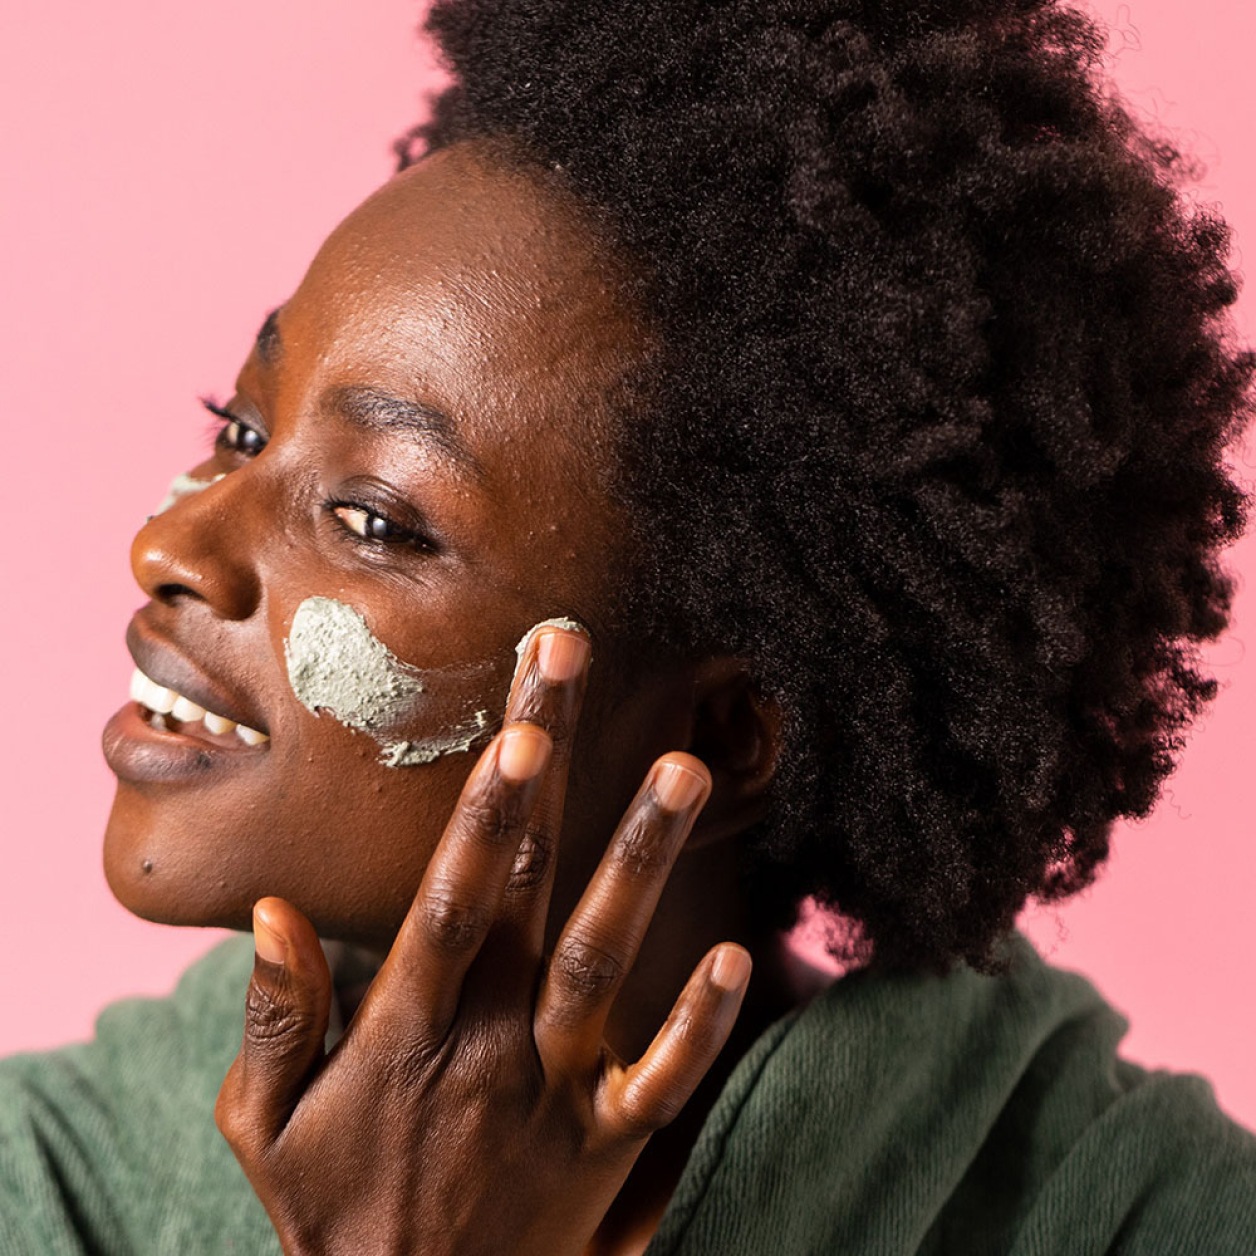 A woman applying a Lush face mask to her cheeks.